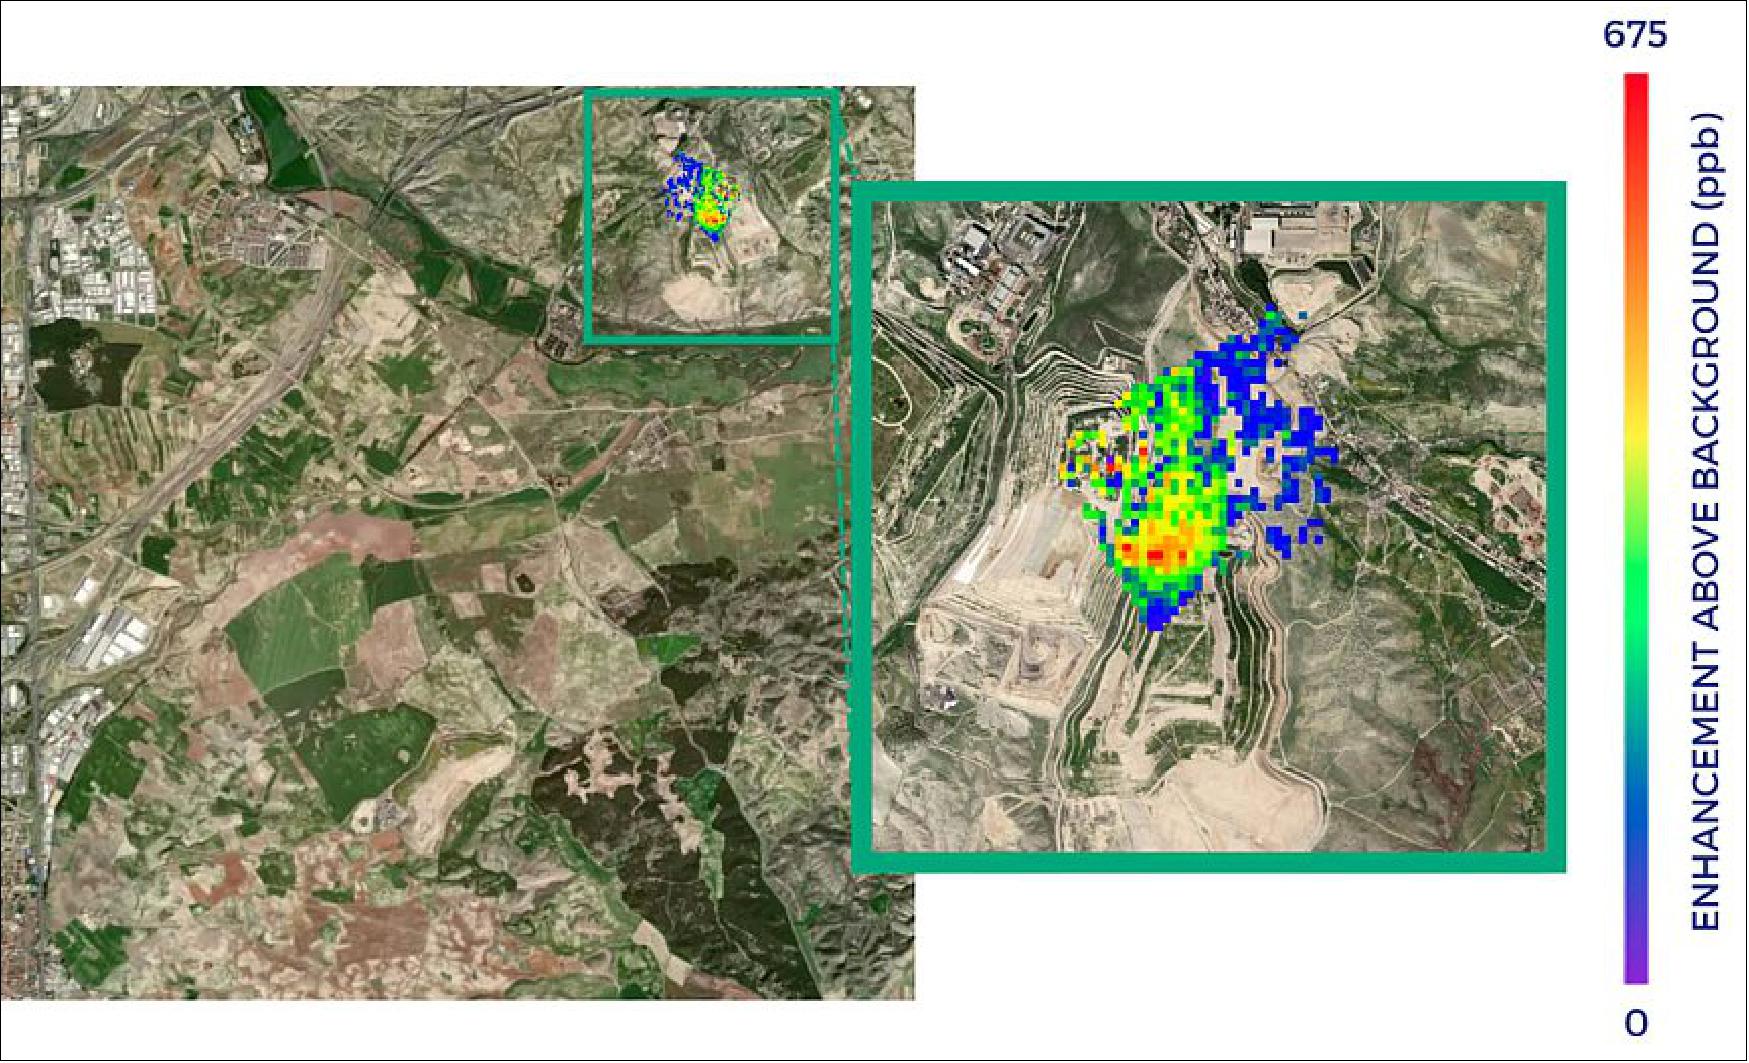 Figure 12: Methane emissions detected from Madrid landfill by by GHGSat. The image shows the methane emissions from one of the landfill sites in Madrid on 20 August 2021 (image credit: GHGSat)